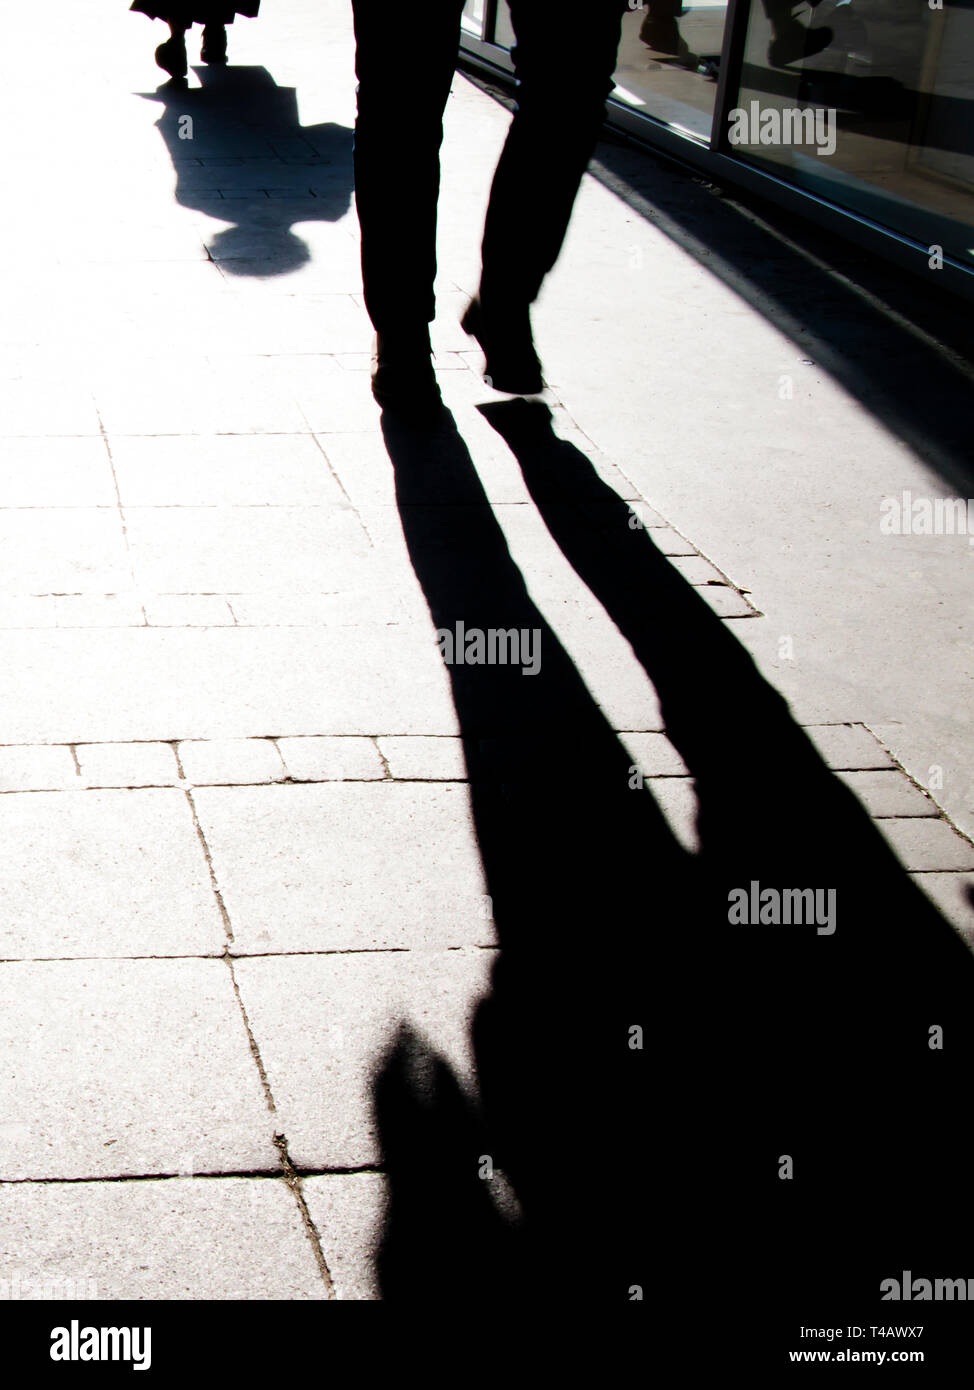 Blurry shadow silhouette of people walking in high contrast black and white Stock Photo